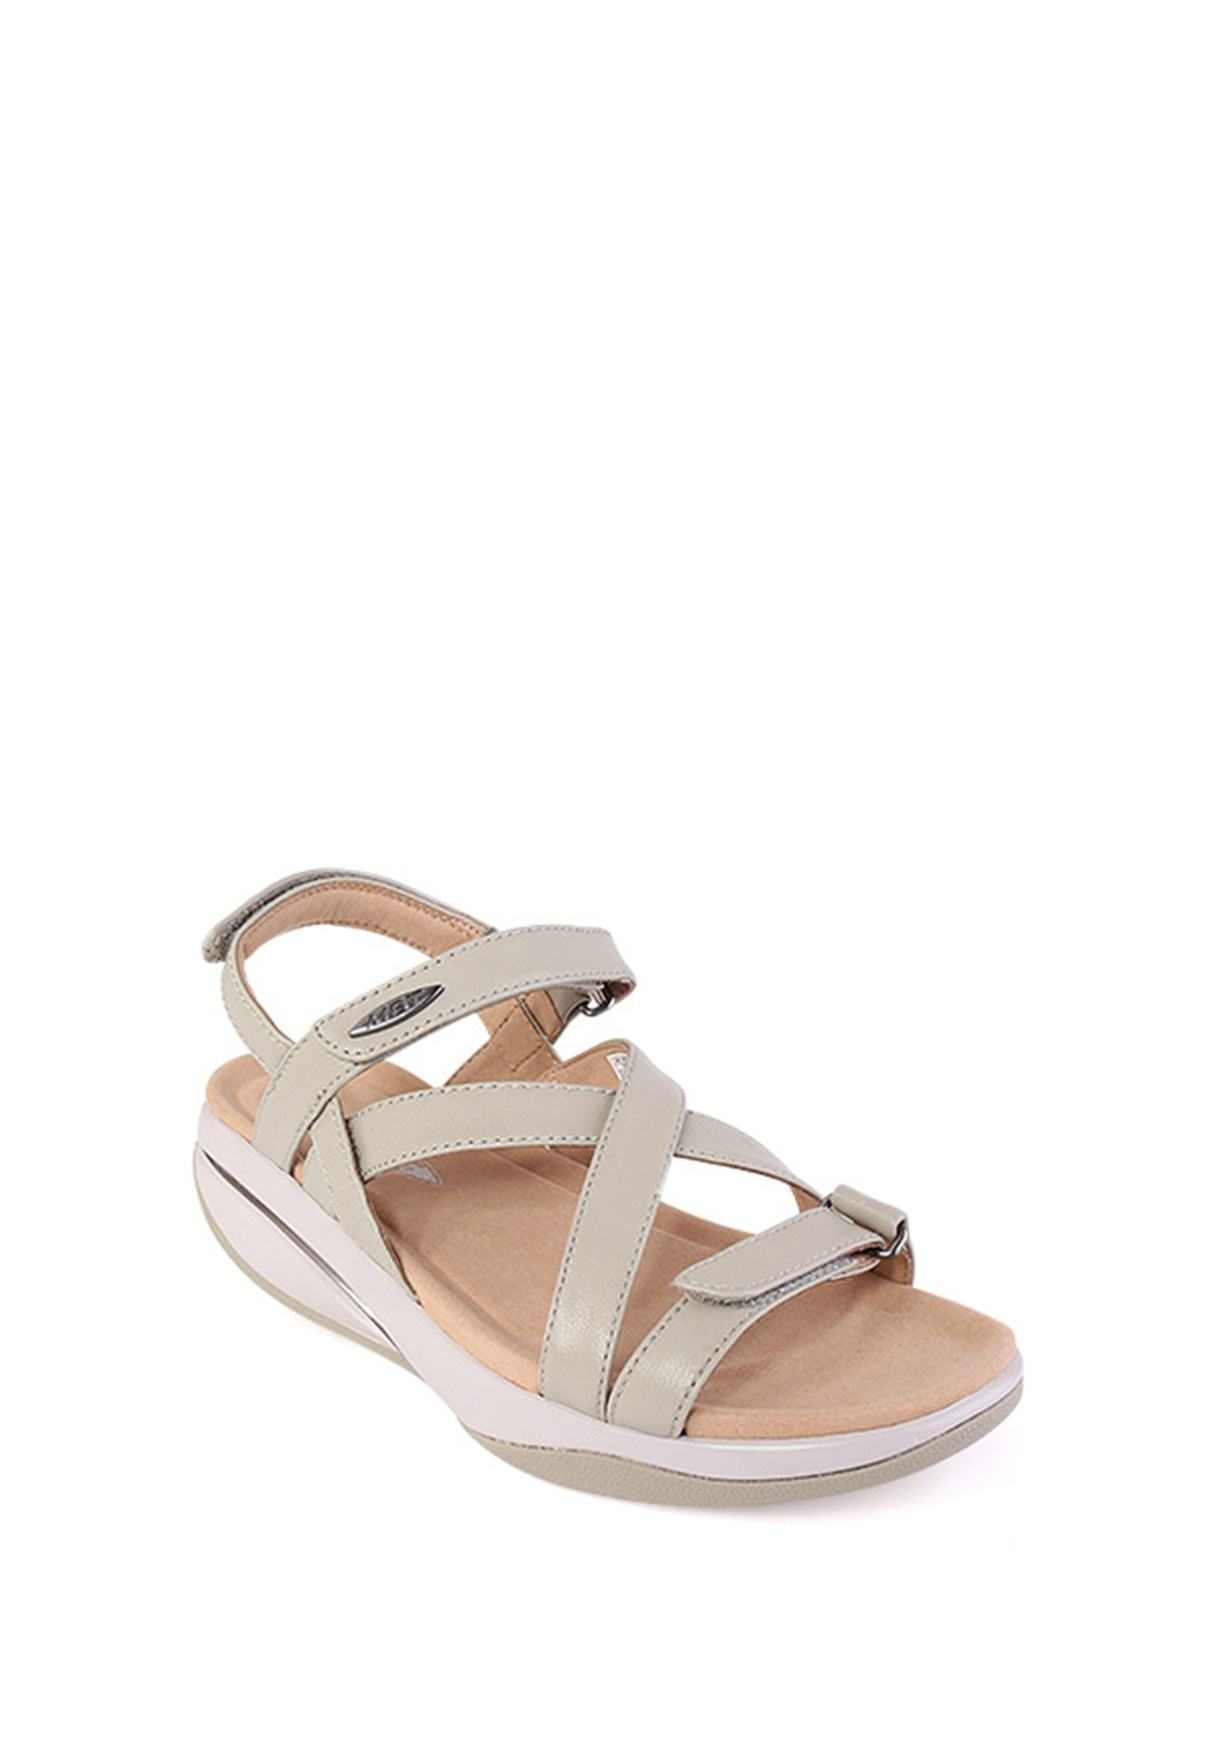 MBT Women's Sandals With an Ankle Strap Sling India | Ubuy